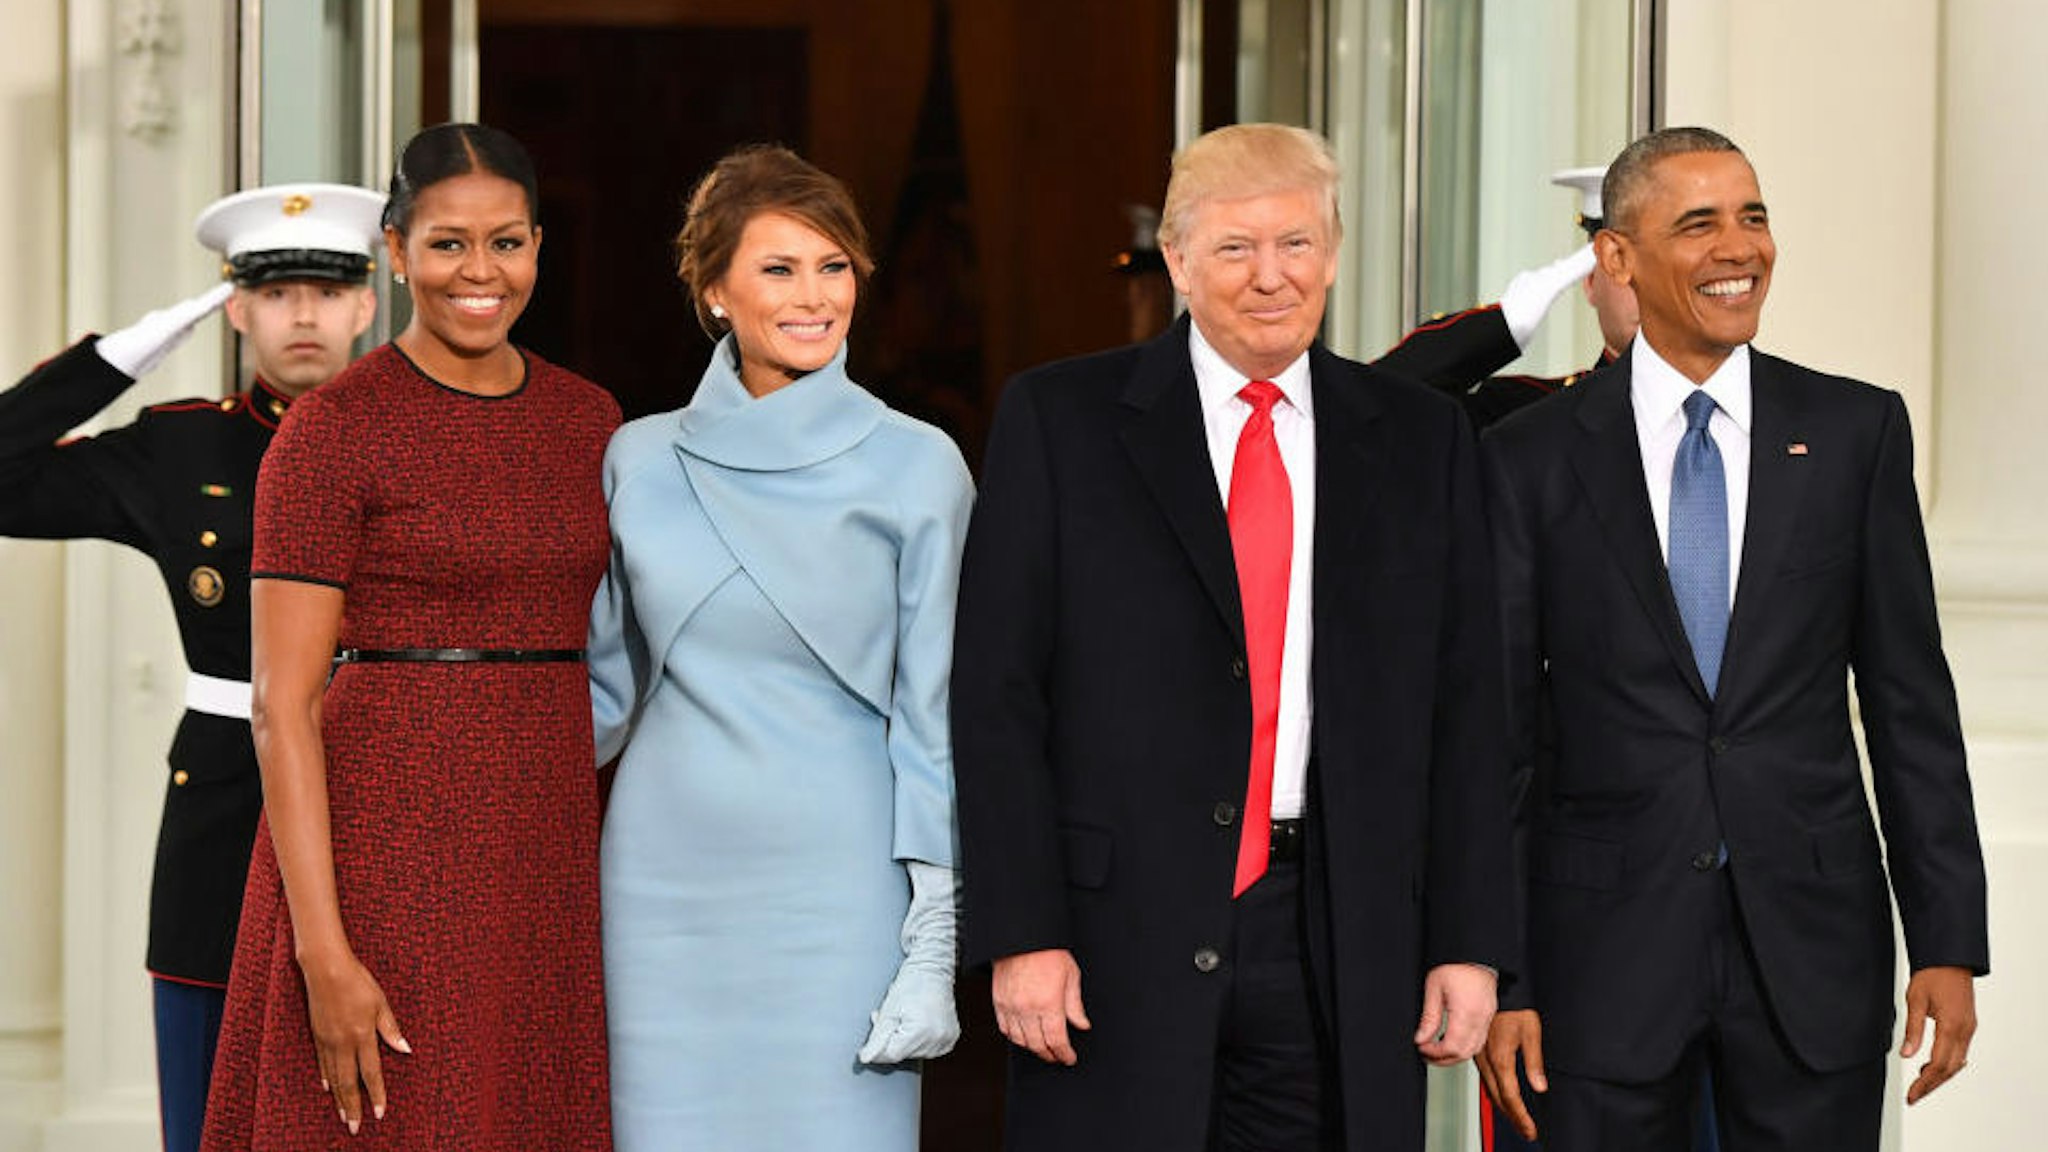 U.S. President Barack Obama, from right, U.S. President-elect Donald Trump, U.S. First Lady-elect Melania Trump, and U.S. First Lady Michelle Obama stand for a photograph outside of the White House ahead of the 58th presidential inauguration in Washington, D.C., U.S., on Friday, Jan. 20, 2017. Sunday, January 20, 2019, marks the second anniversary of U.S. President Donald Trump's inauguration. Our editors select the best archive images looking back over Trump’s second year in office. Photographer: Kevin Dietsch/Pool via Bloomberg